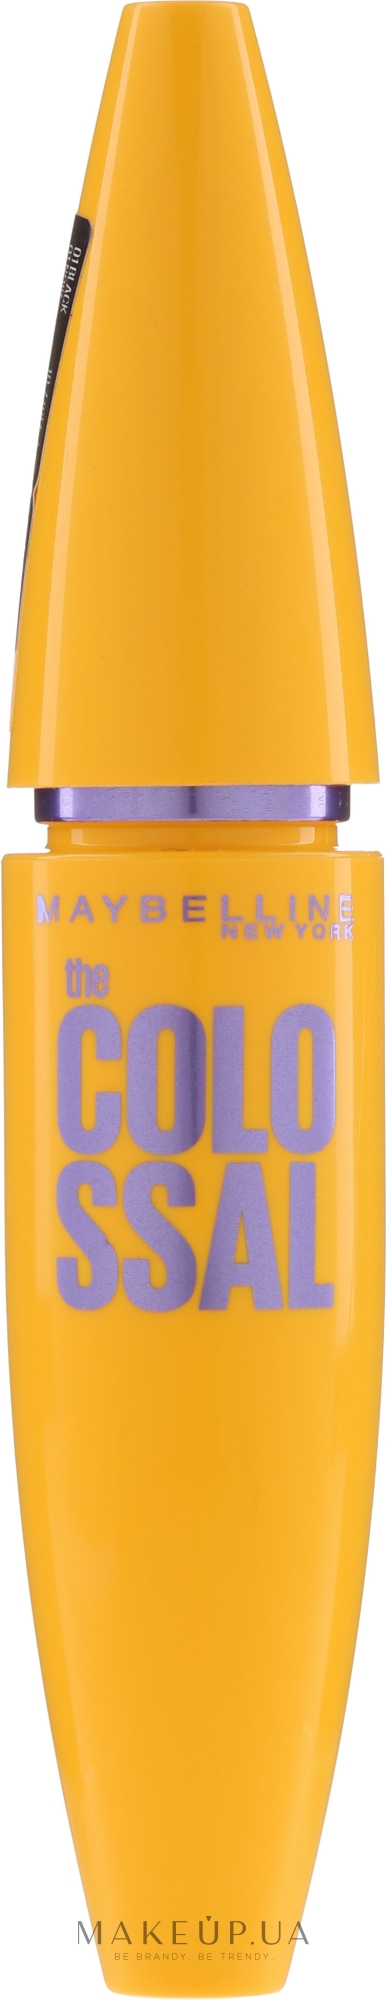 Maybelline New York Colossal